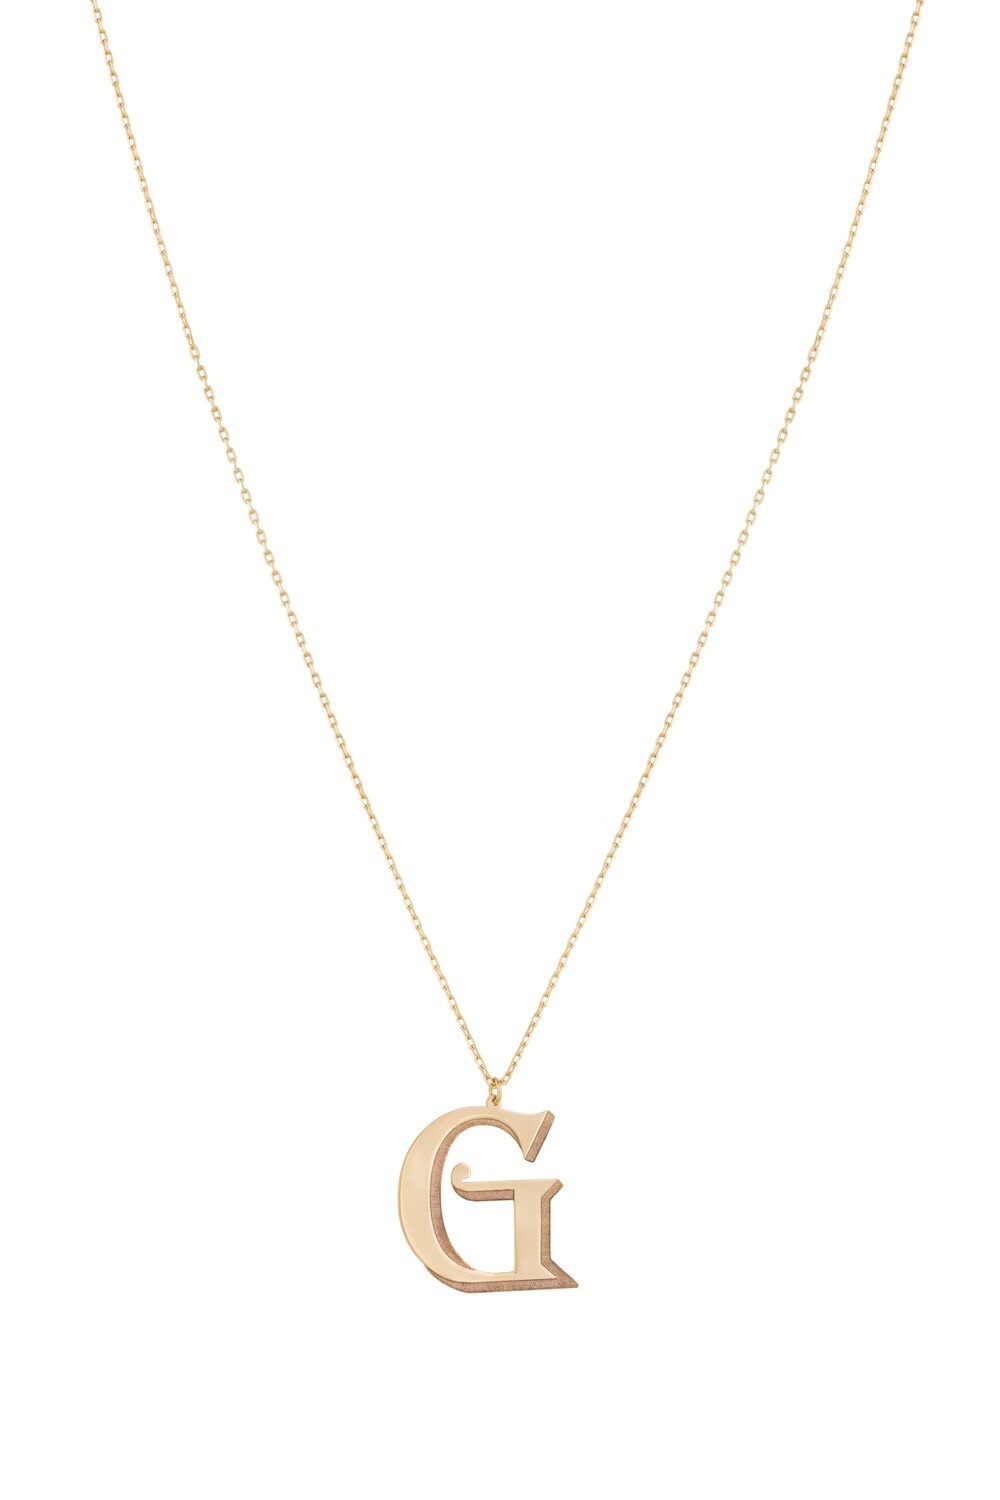 Initials Gold Necklace Letter G